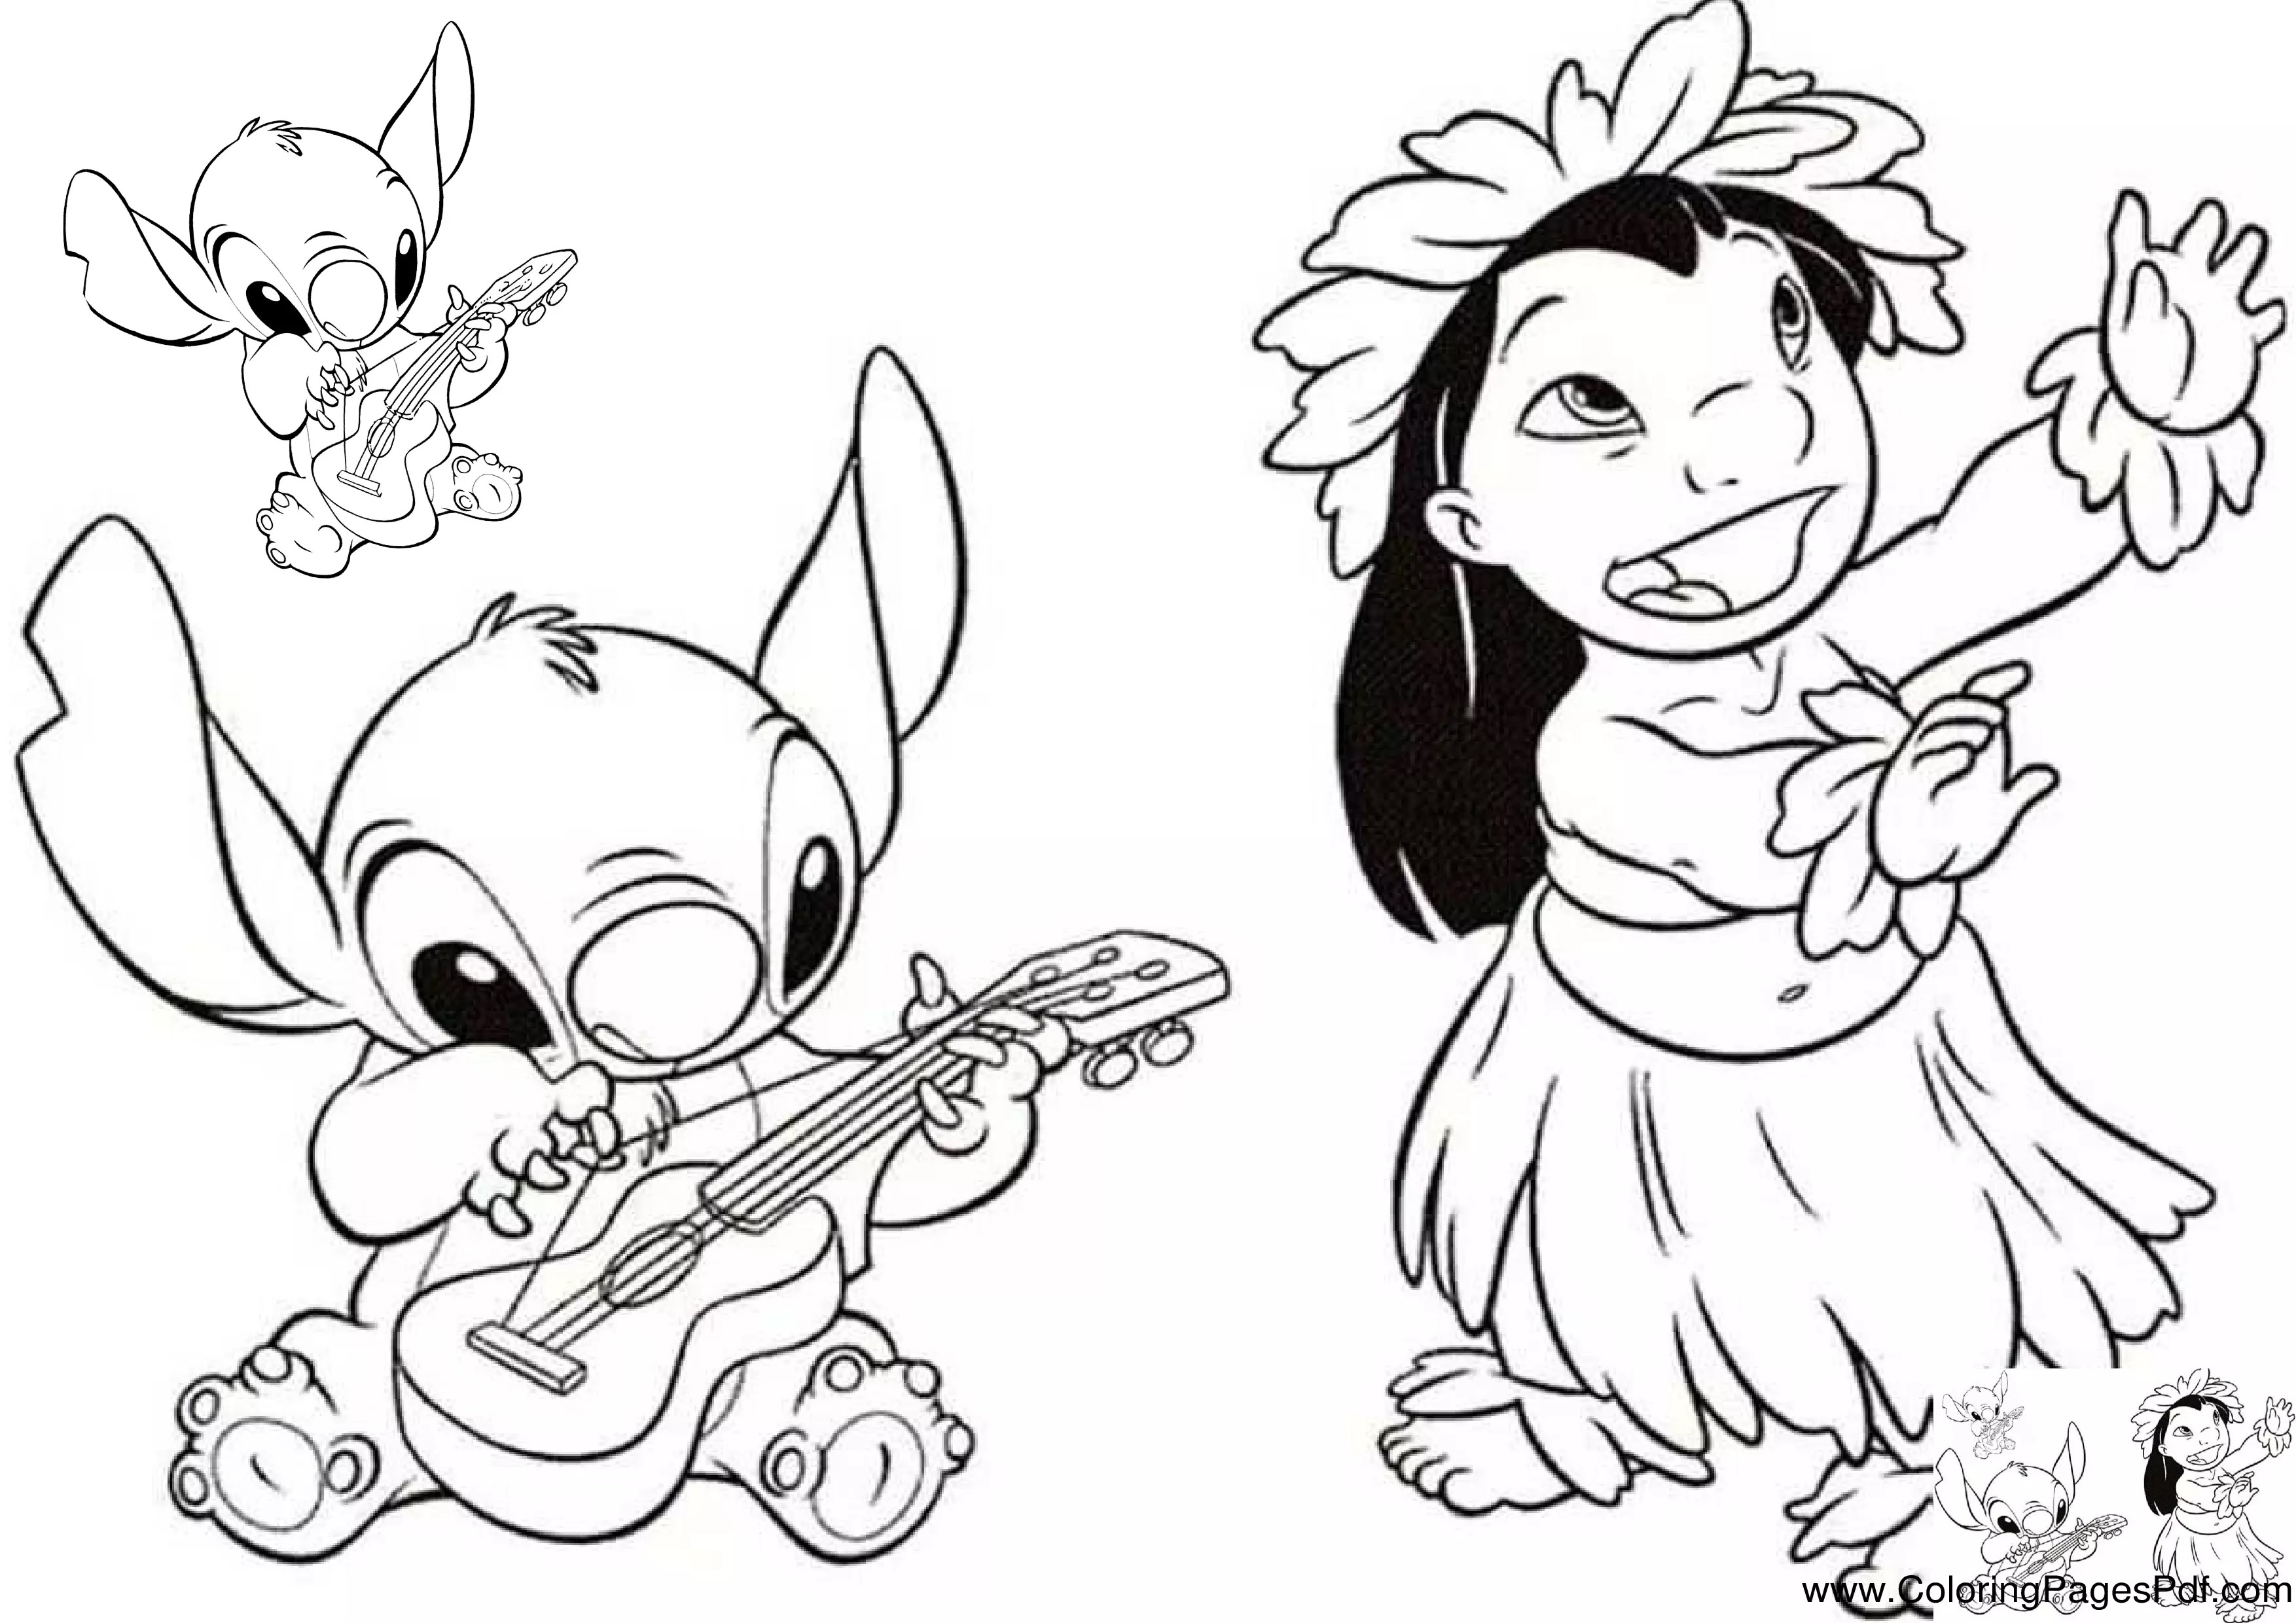 Baby stitch coloring pages